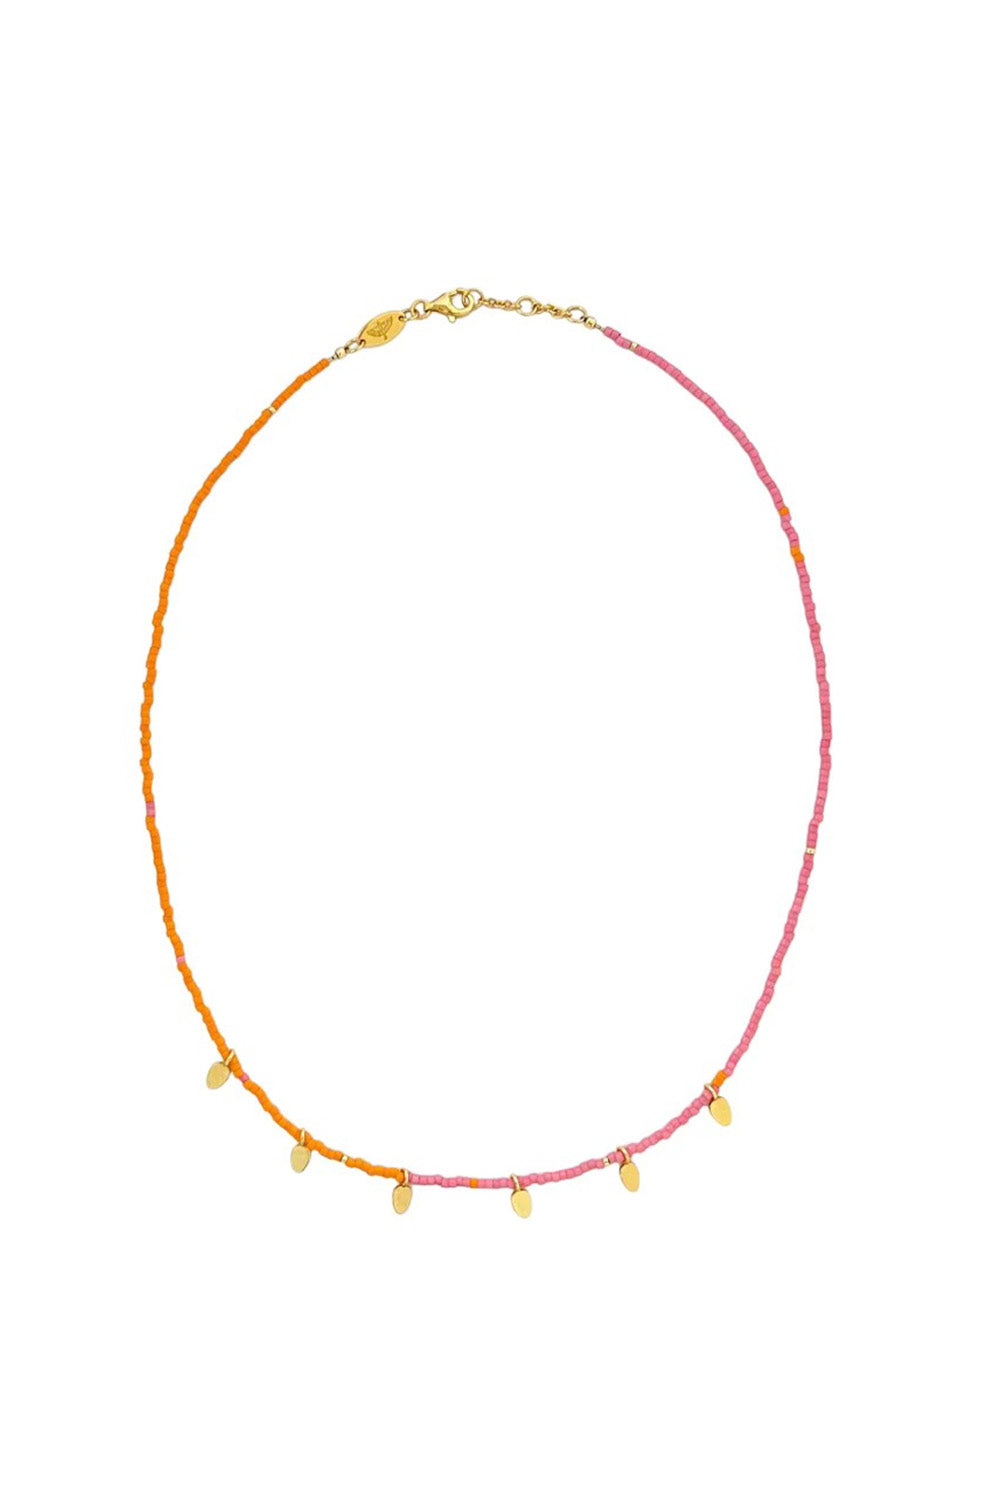 GOLD SISTER - TWIST OF FATE NECKLACE PINK & ORANGE